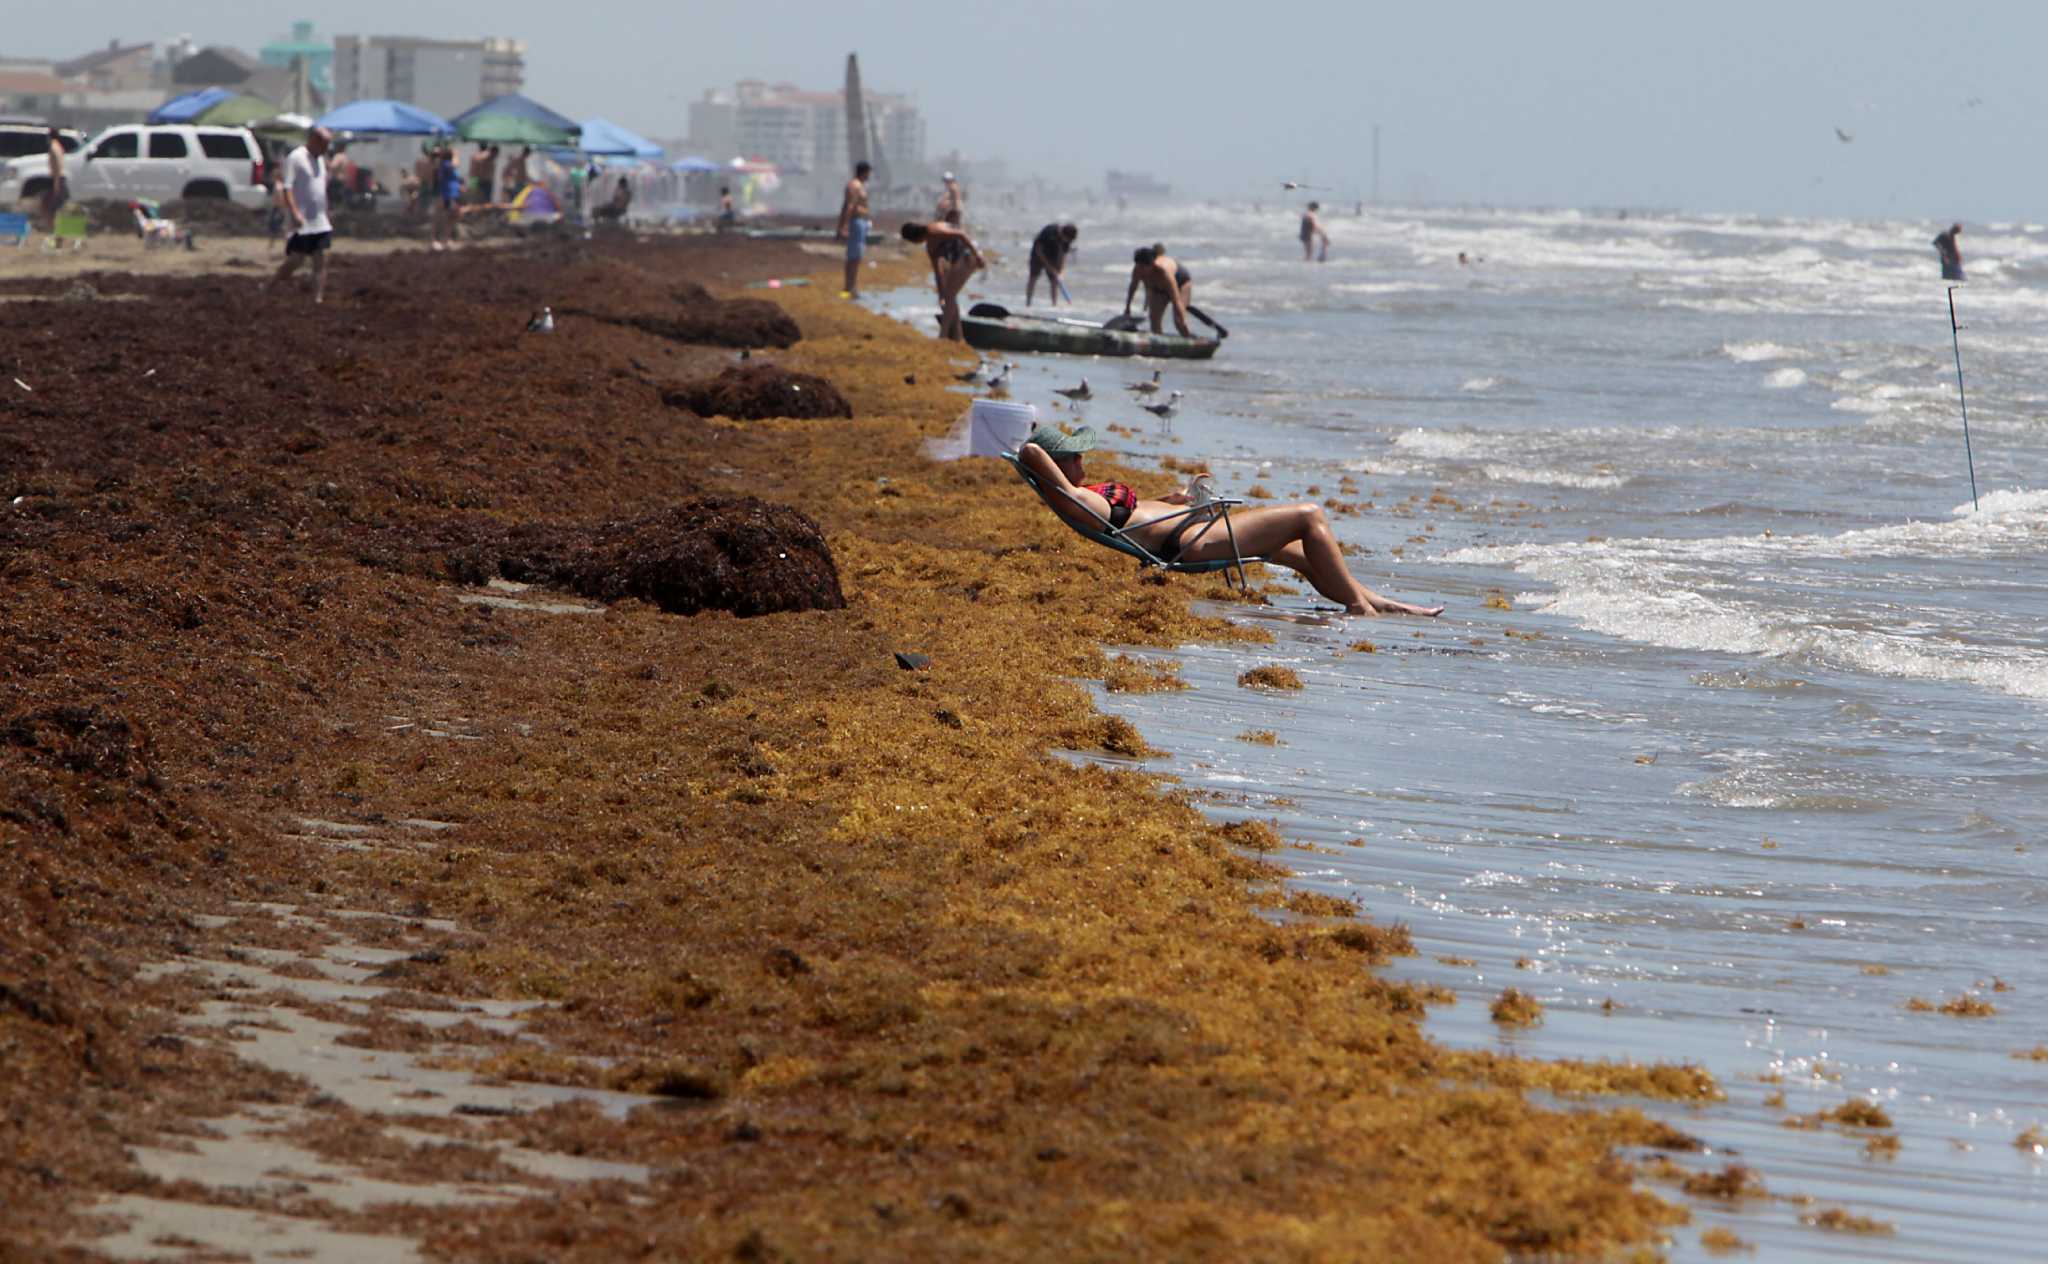 Galveston may be spared from unsightly seaweed this season